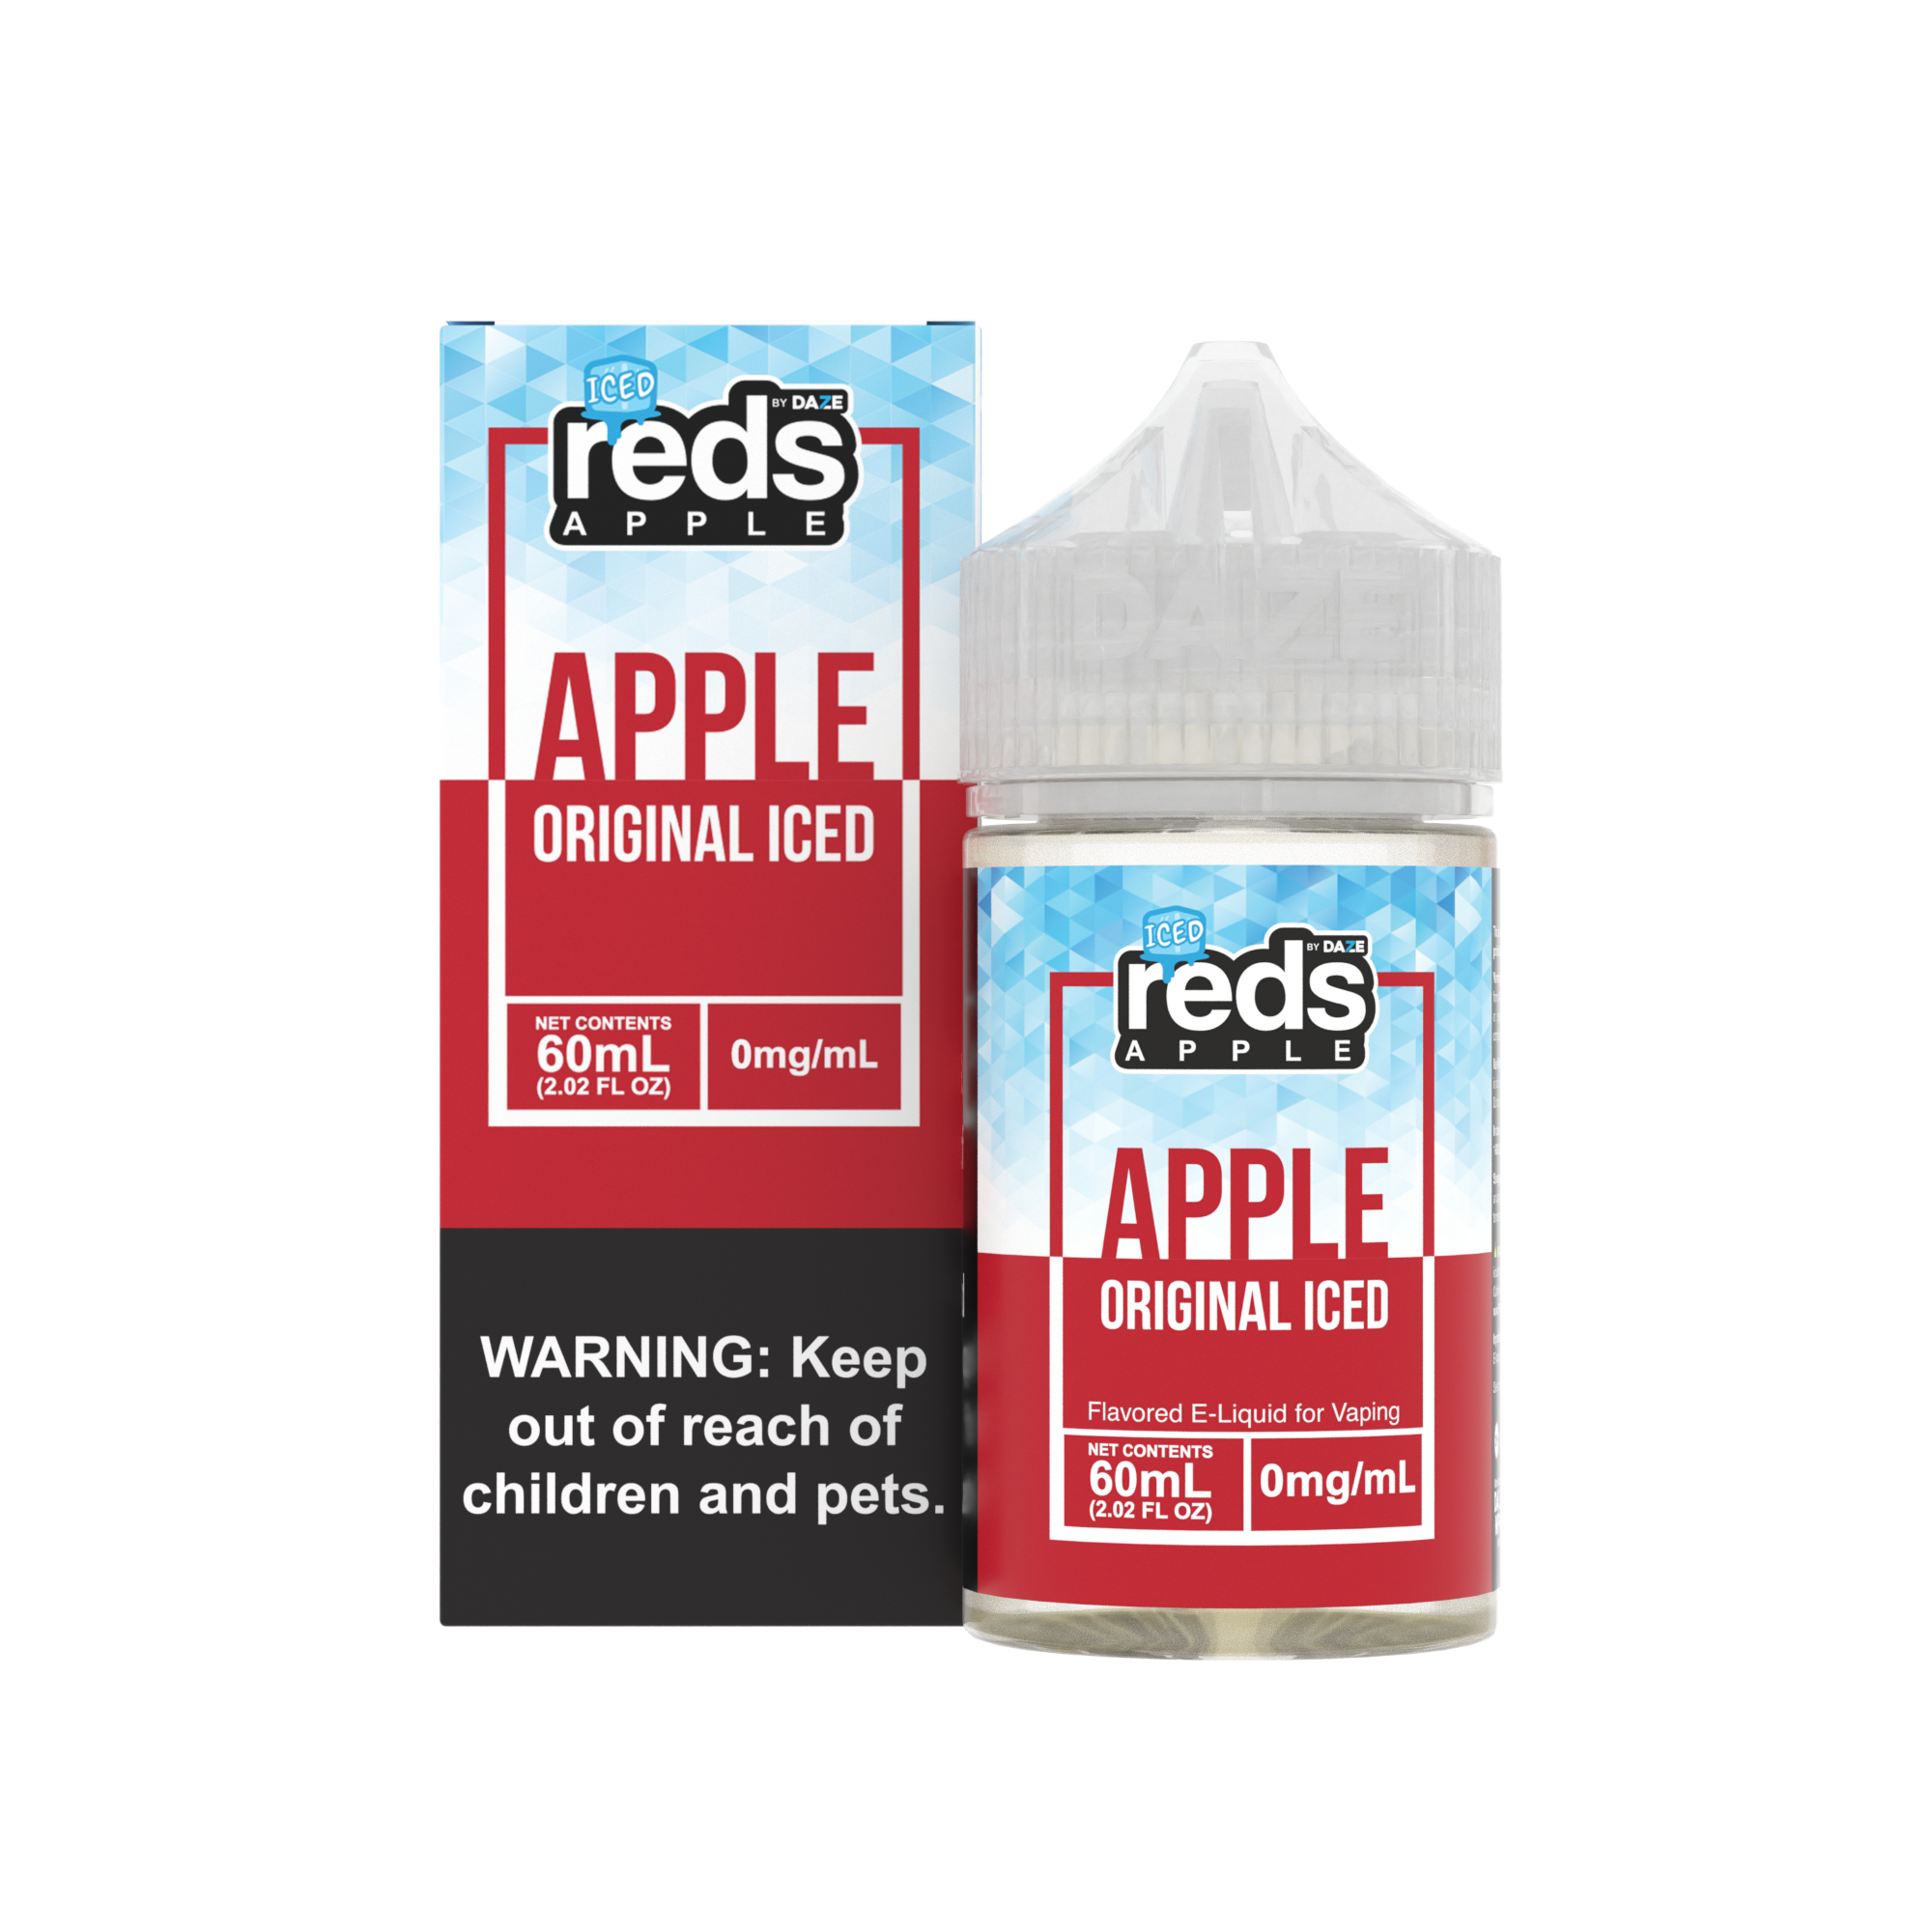 Reds-AppleICED-60ml-00mg-w-box.png